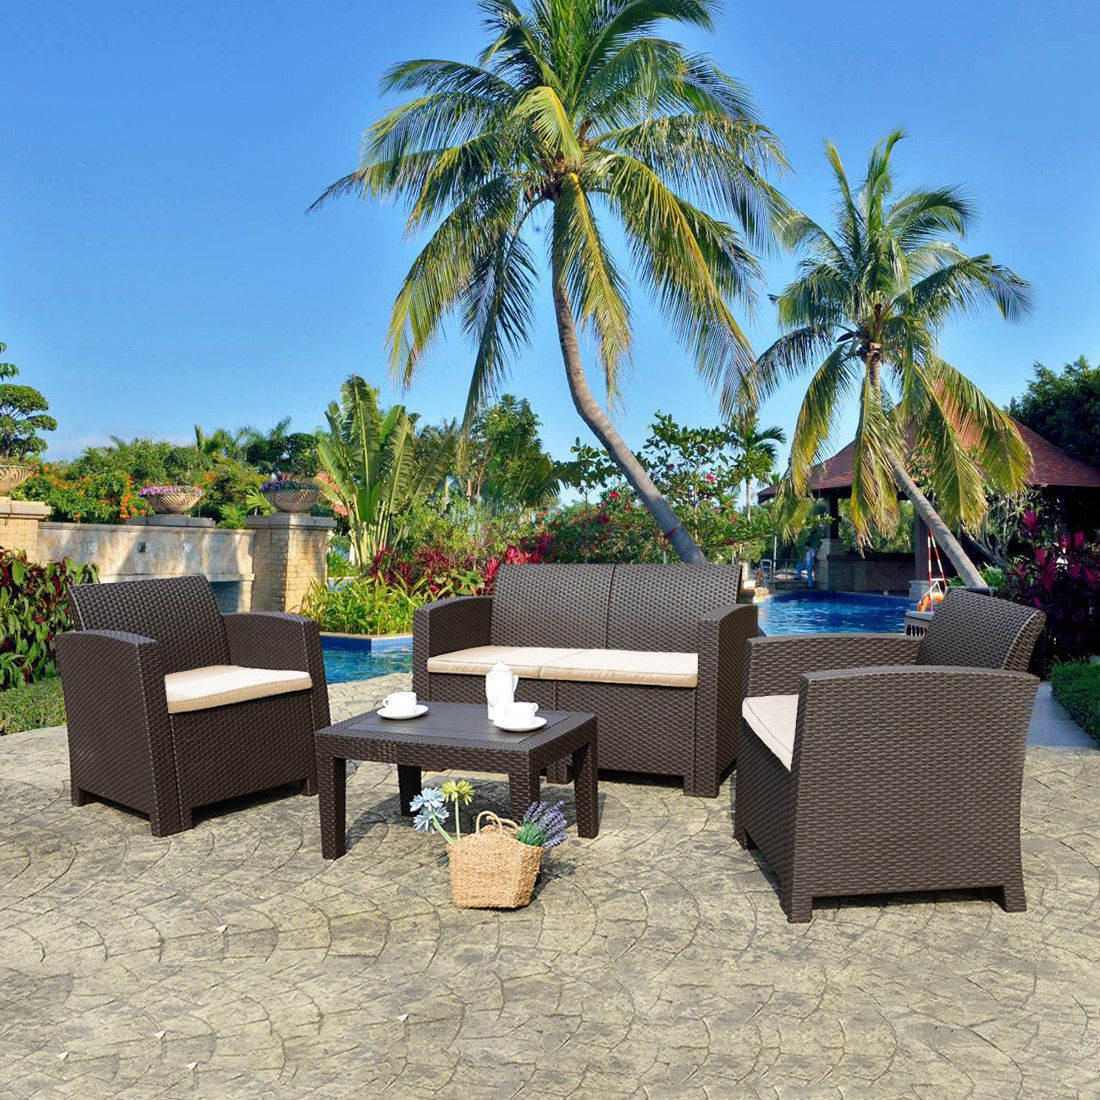 4 Pieces Patio Furniture Sets All Weather Outdoor Sectional Sofa Resin Plastic Wicker Pattern Patio